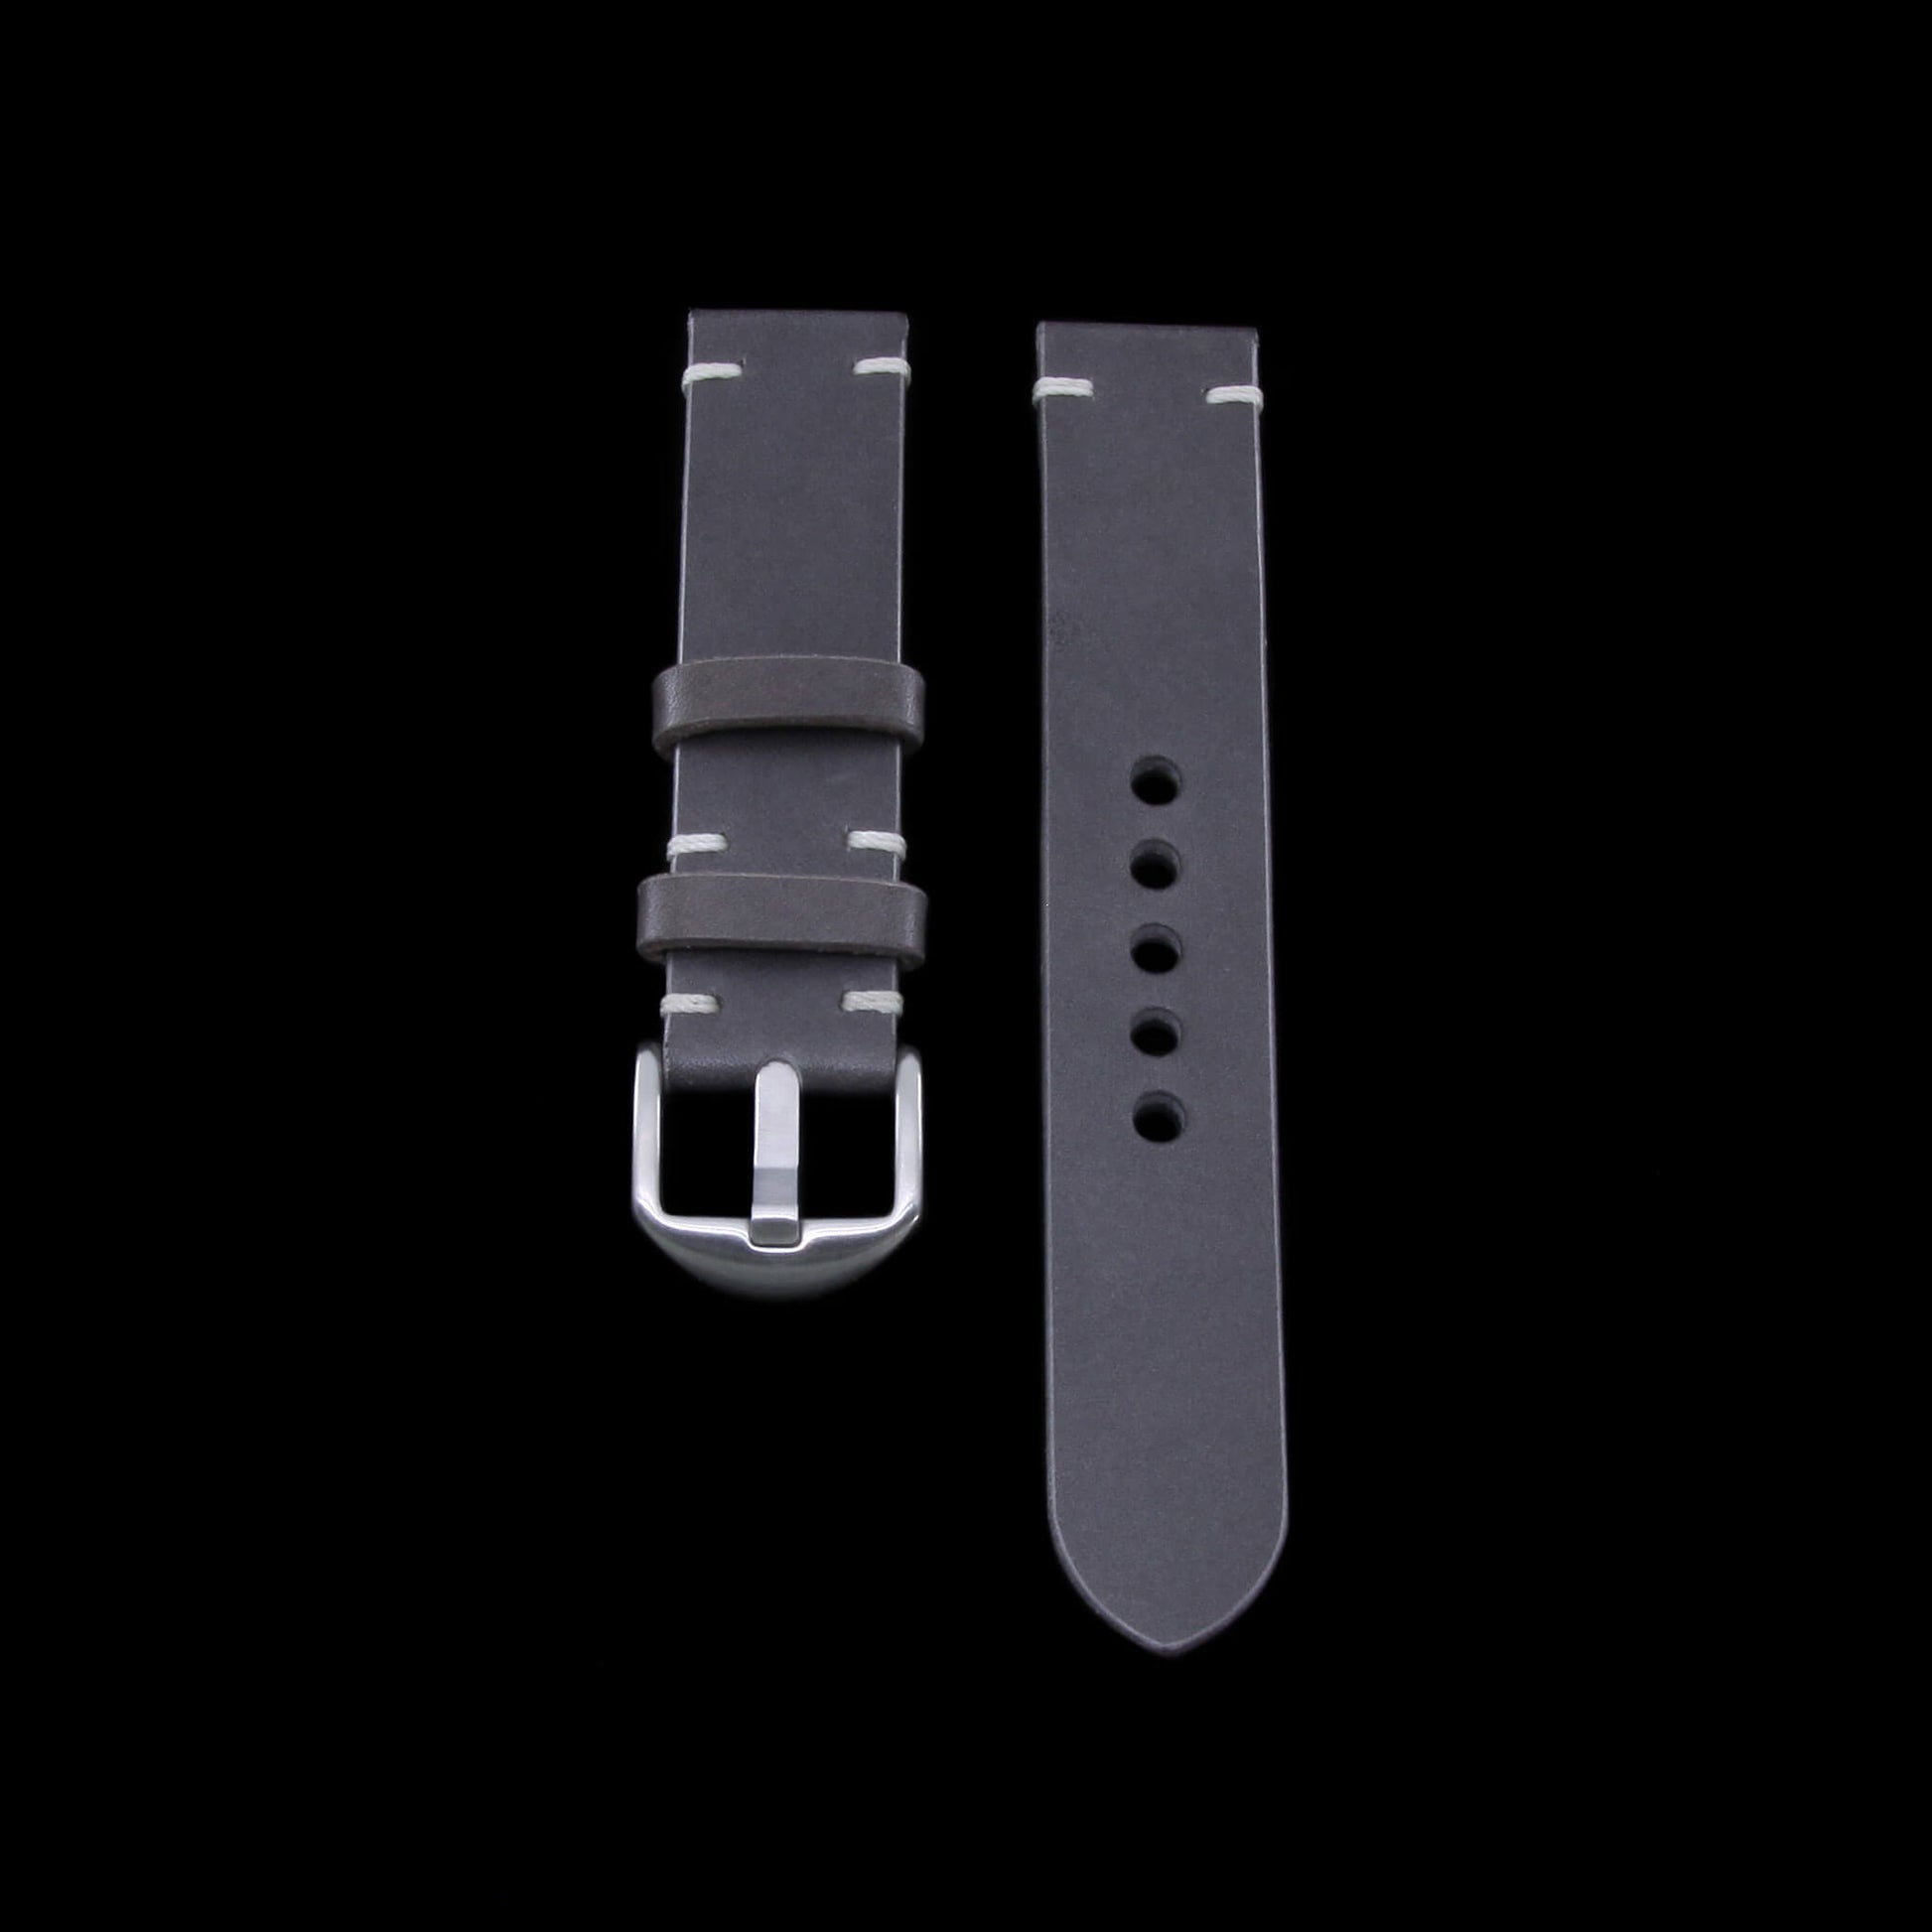 2nd View of 2-Piece Minimalist Leather Watch Strap, made with Koala Antracite Italian veg-tanned leather by Cozy Handmade